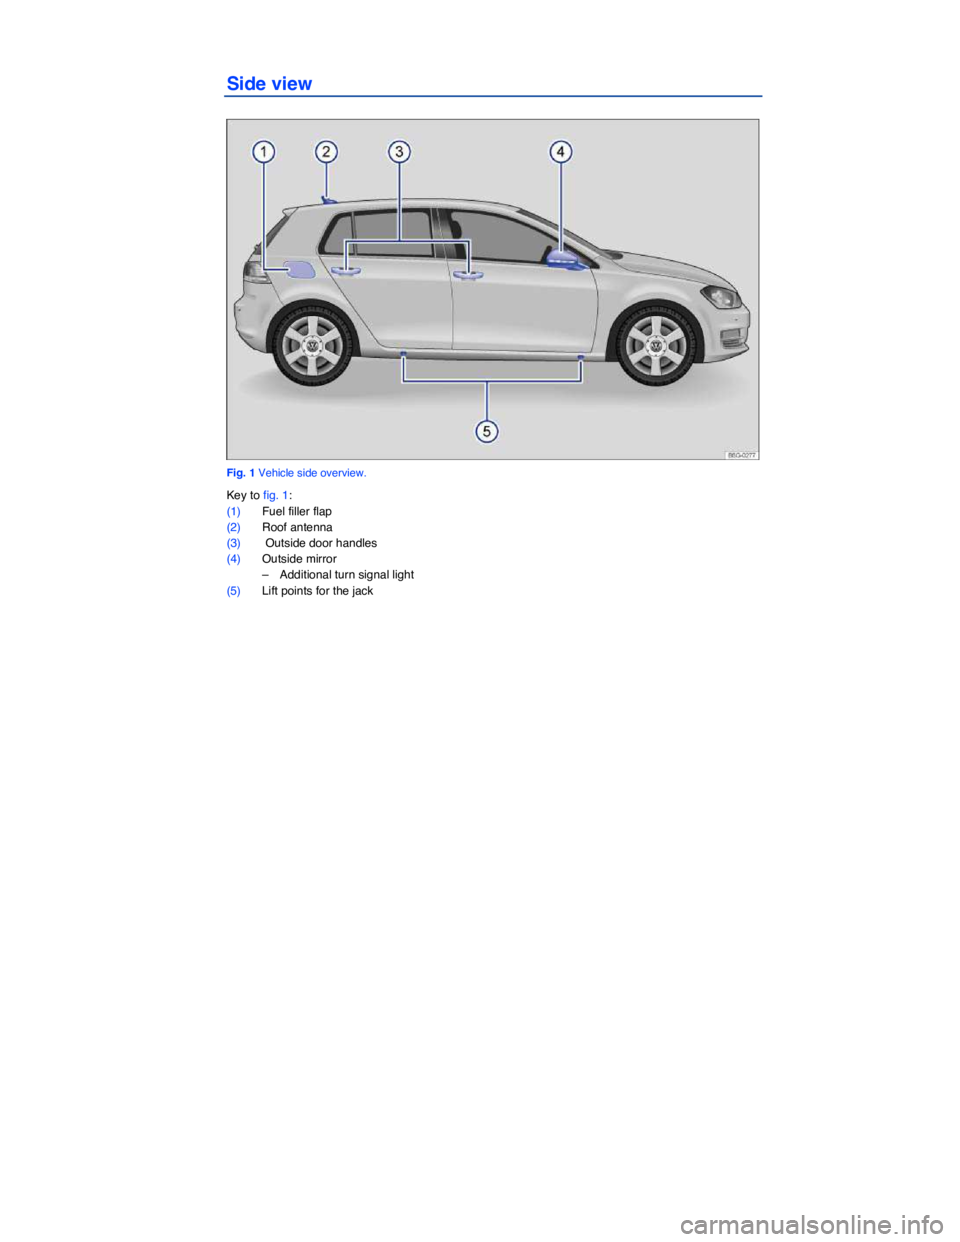 VOLKSWAGEN GOLF PLUS 2014  Owners Manual   
Side view 
 
Fig. 1 Vehicle side overview. 
Key to fig. 1: 
(1) Fuel filler flap 
(2) Roof antenna  
(3)  Outside door handles  
(4) Outside mirror  
–  Additional turn signal light  
(5) Lift po